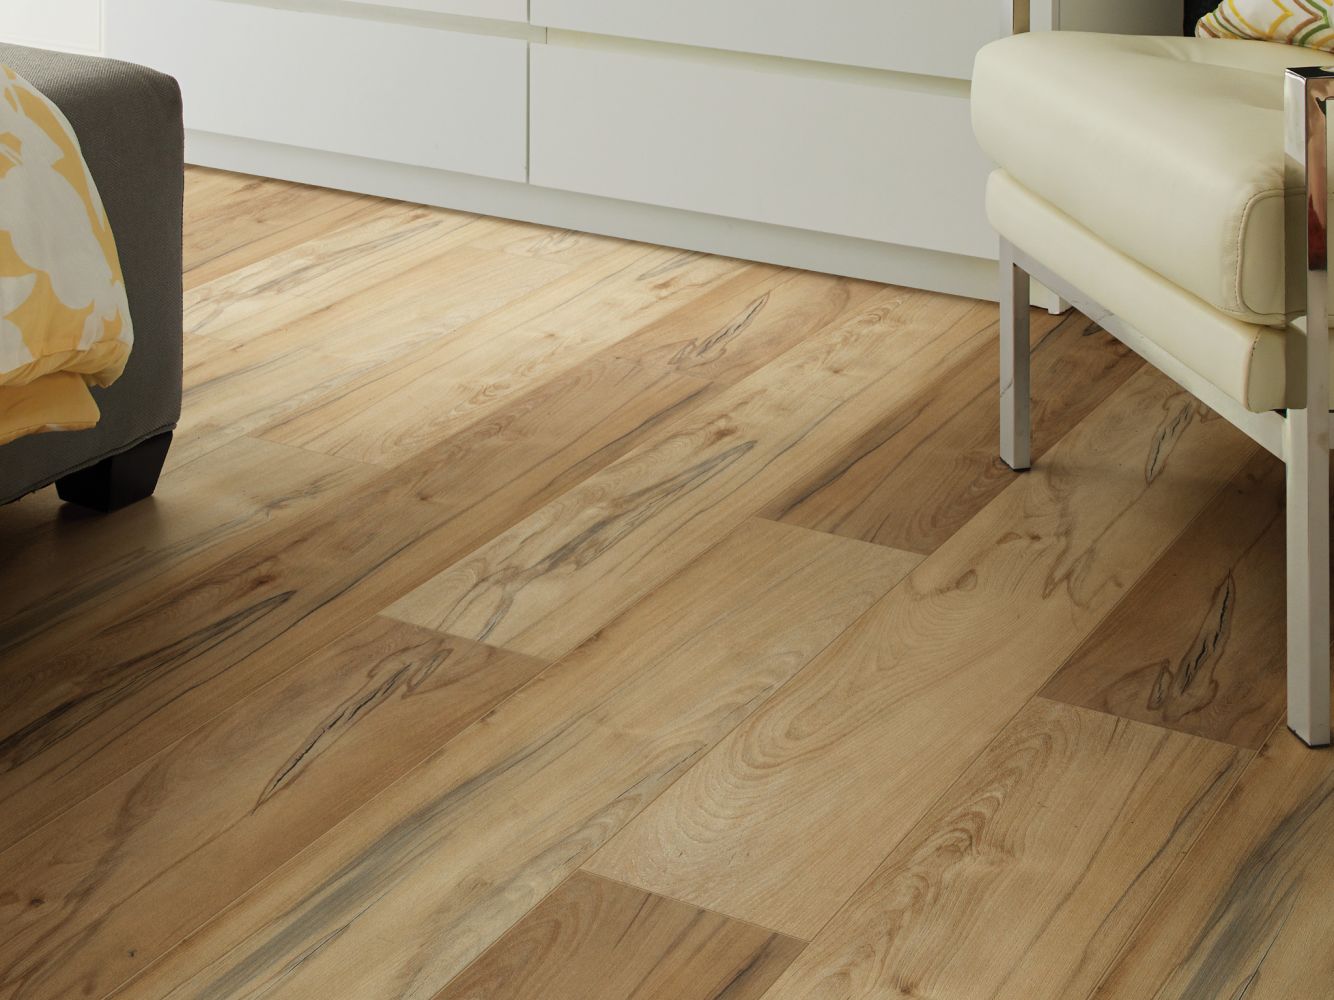 Shaw Floors Resilient Residential Titan HD Plus Imperial Beech 00185_2002V